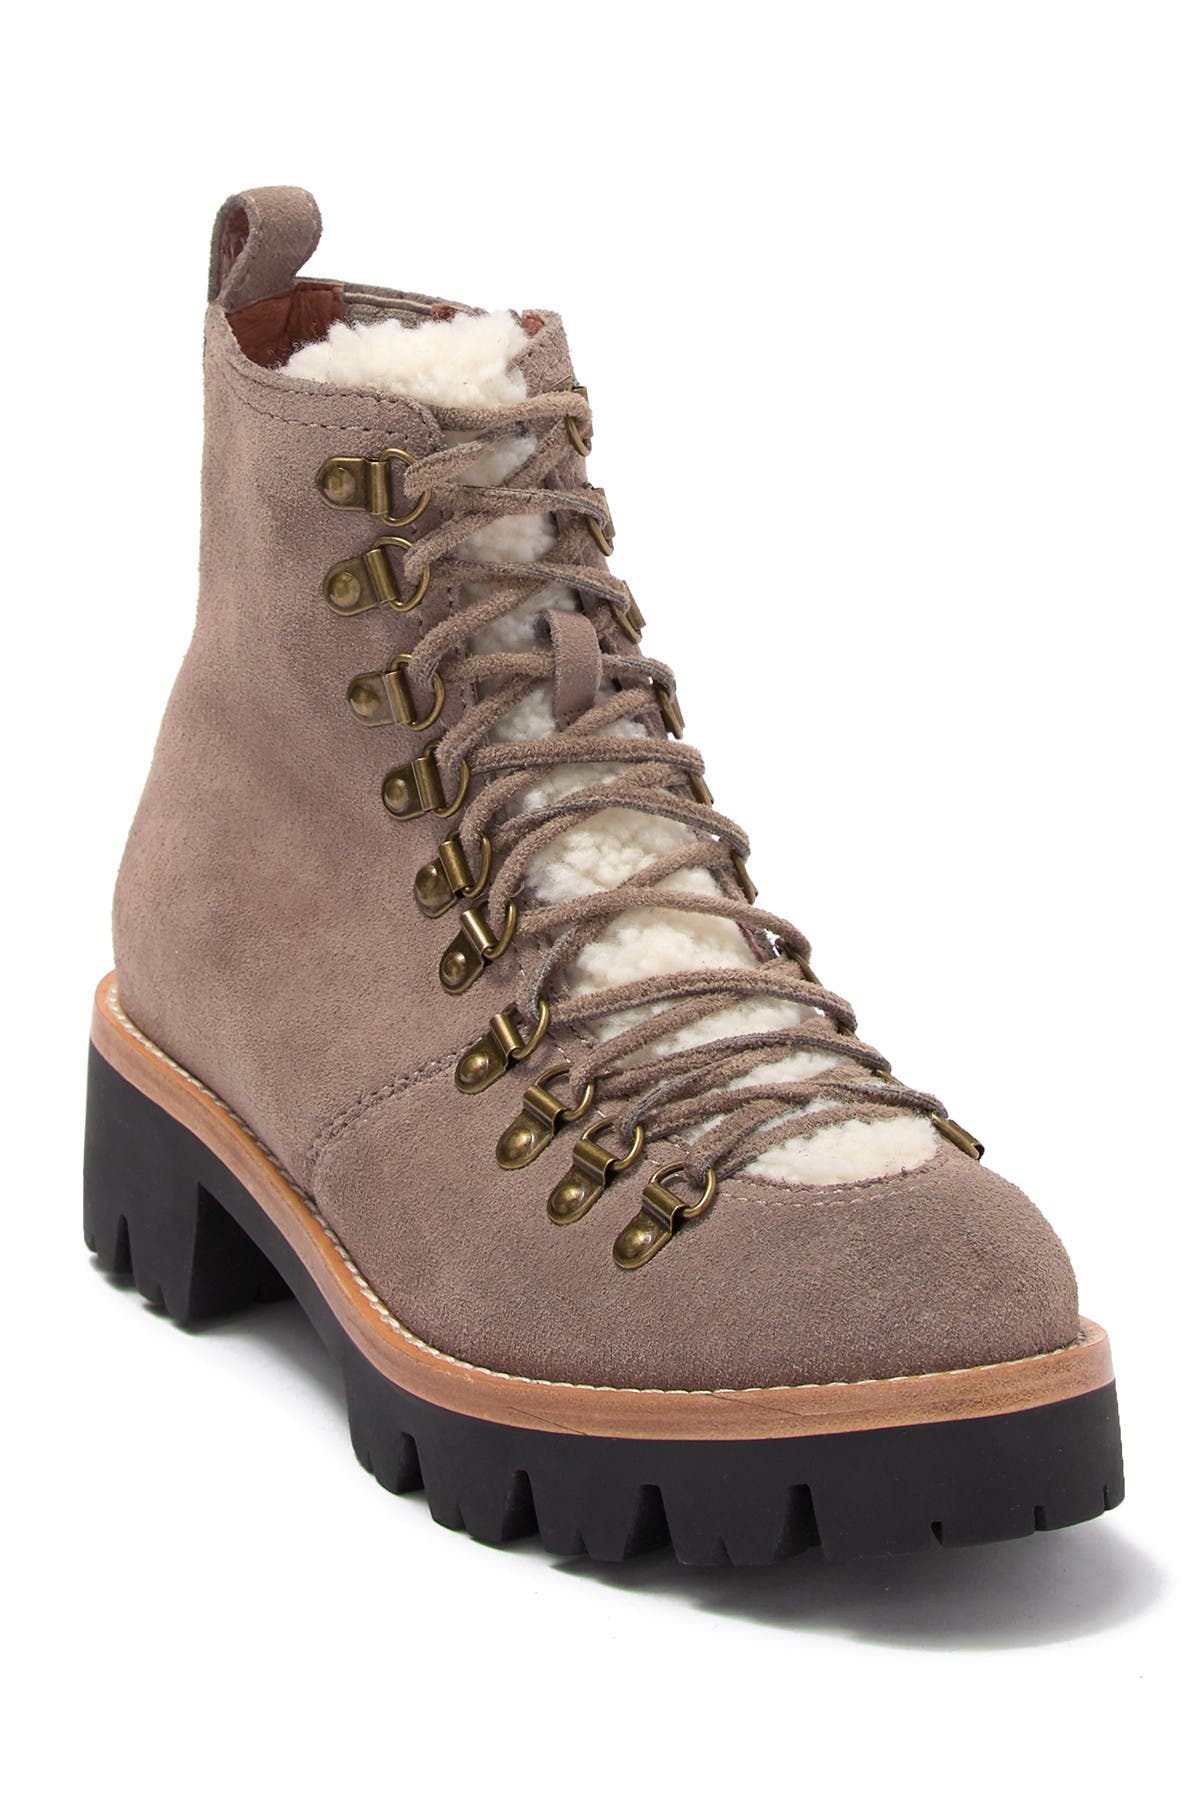 nordstrom rack hiking boots